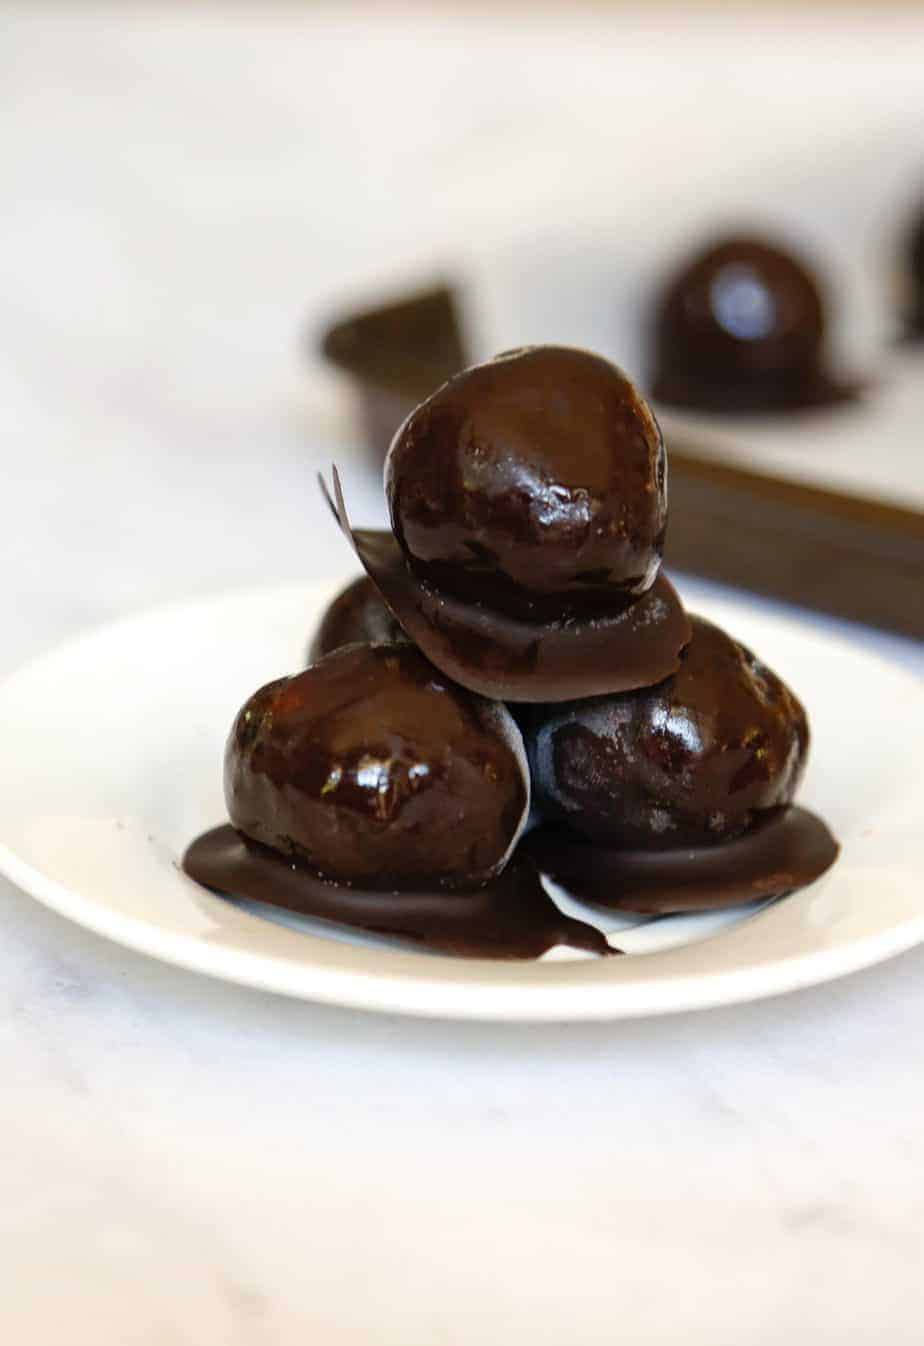 Vegan Chocolate Truffles, Vegan Chocolate Truffles with Cashew Filling